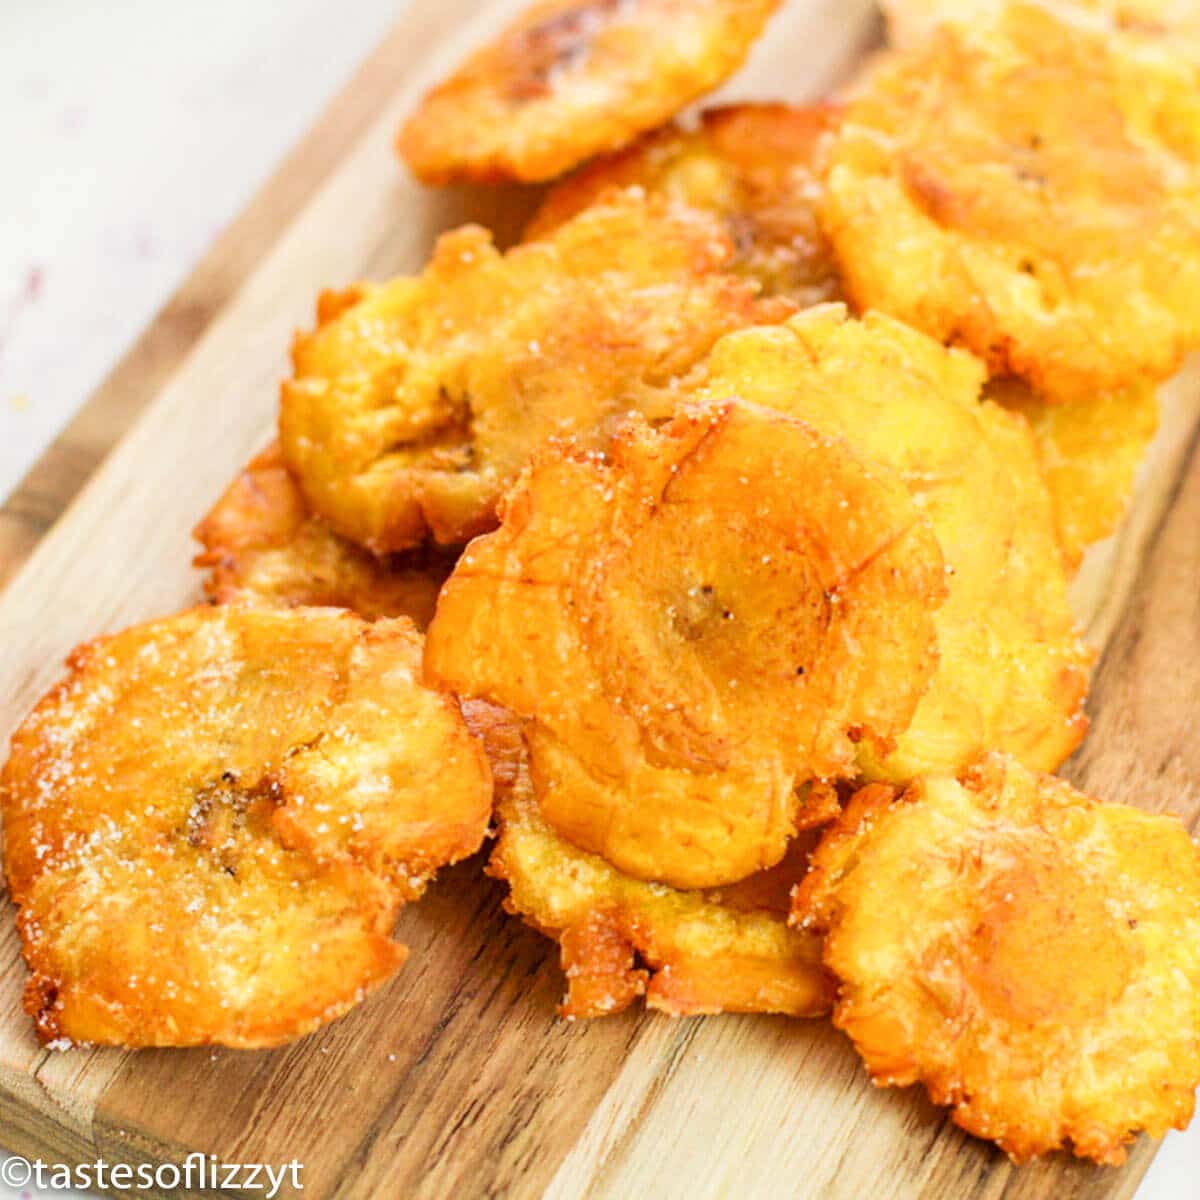 Fried Plantains Recipe {How to Make Tostones / Double Fried Plantains}